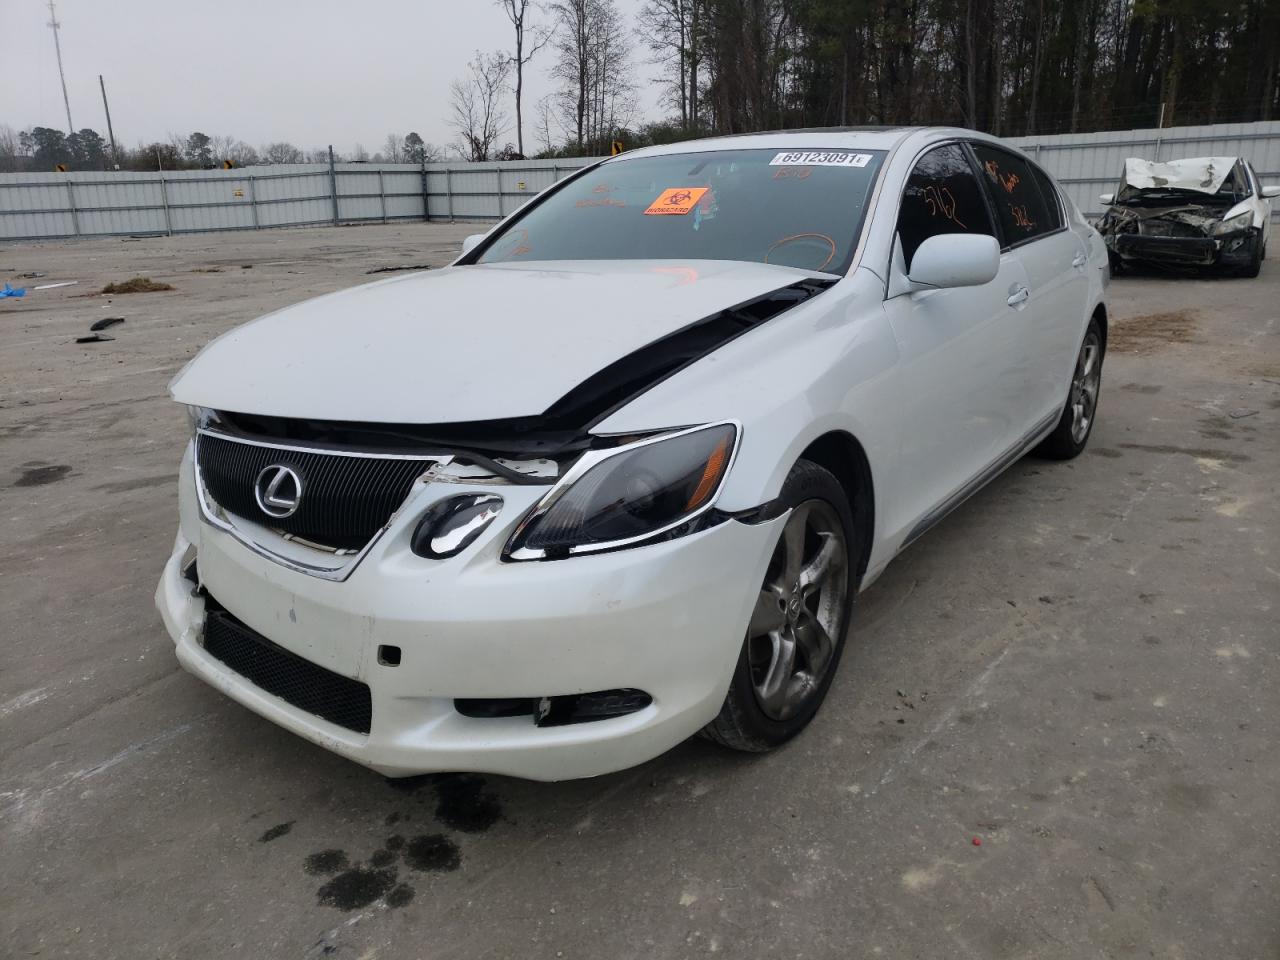 2006 LEXUS GS300 VIN JTHBH96S465033219 from the USA PLC